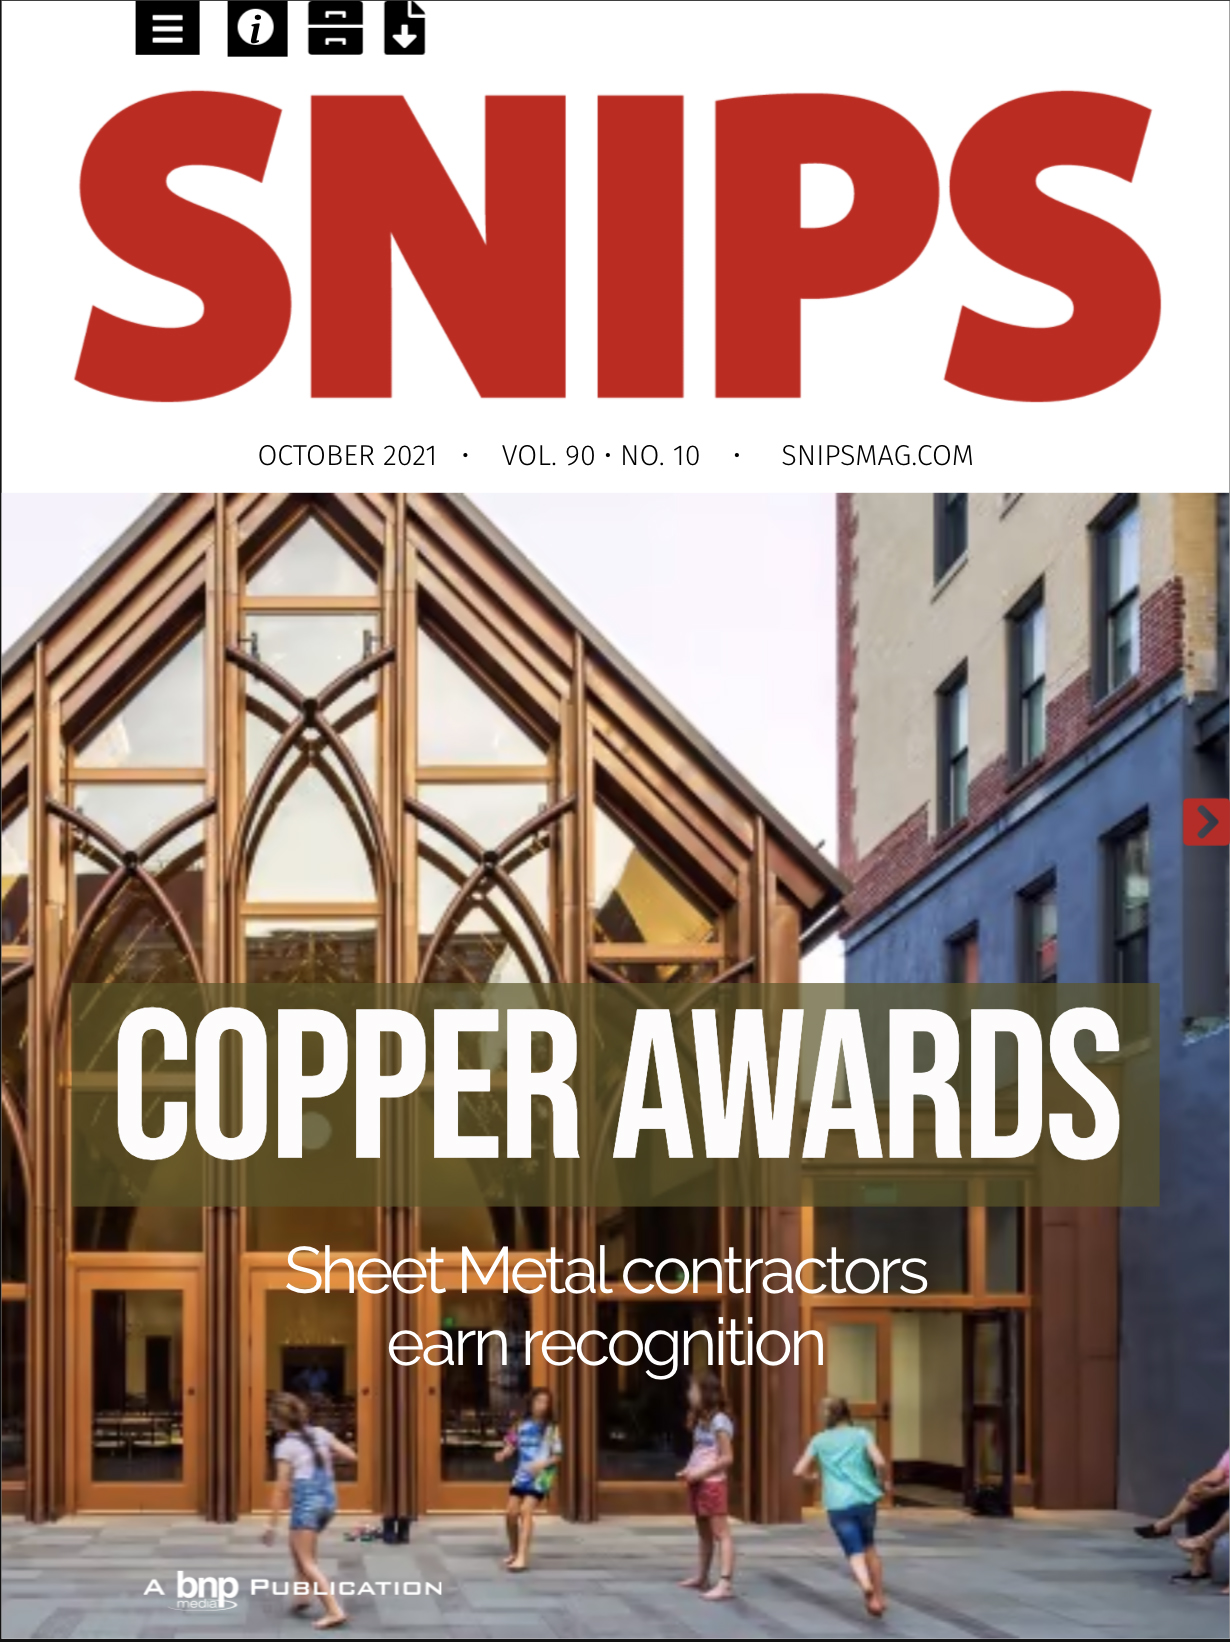 SNIPS NEWS October 2021 Cover